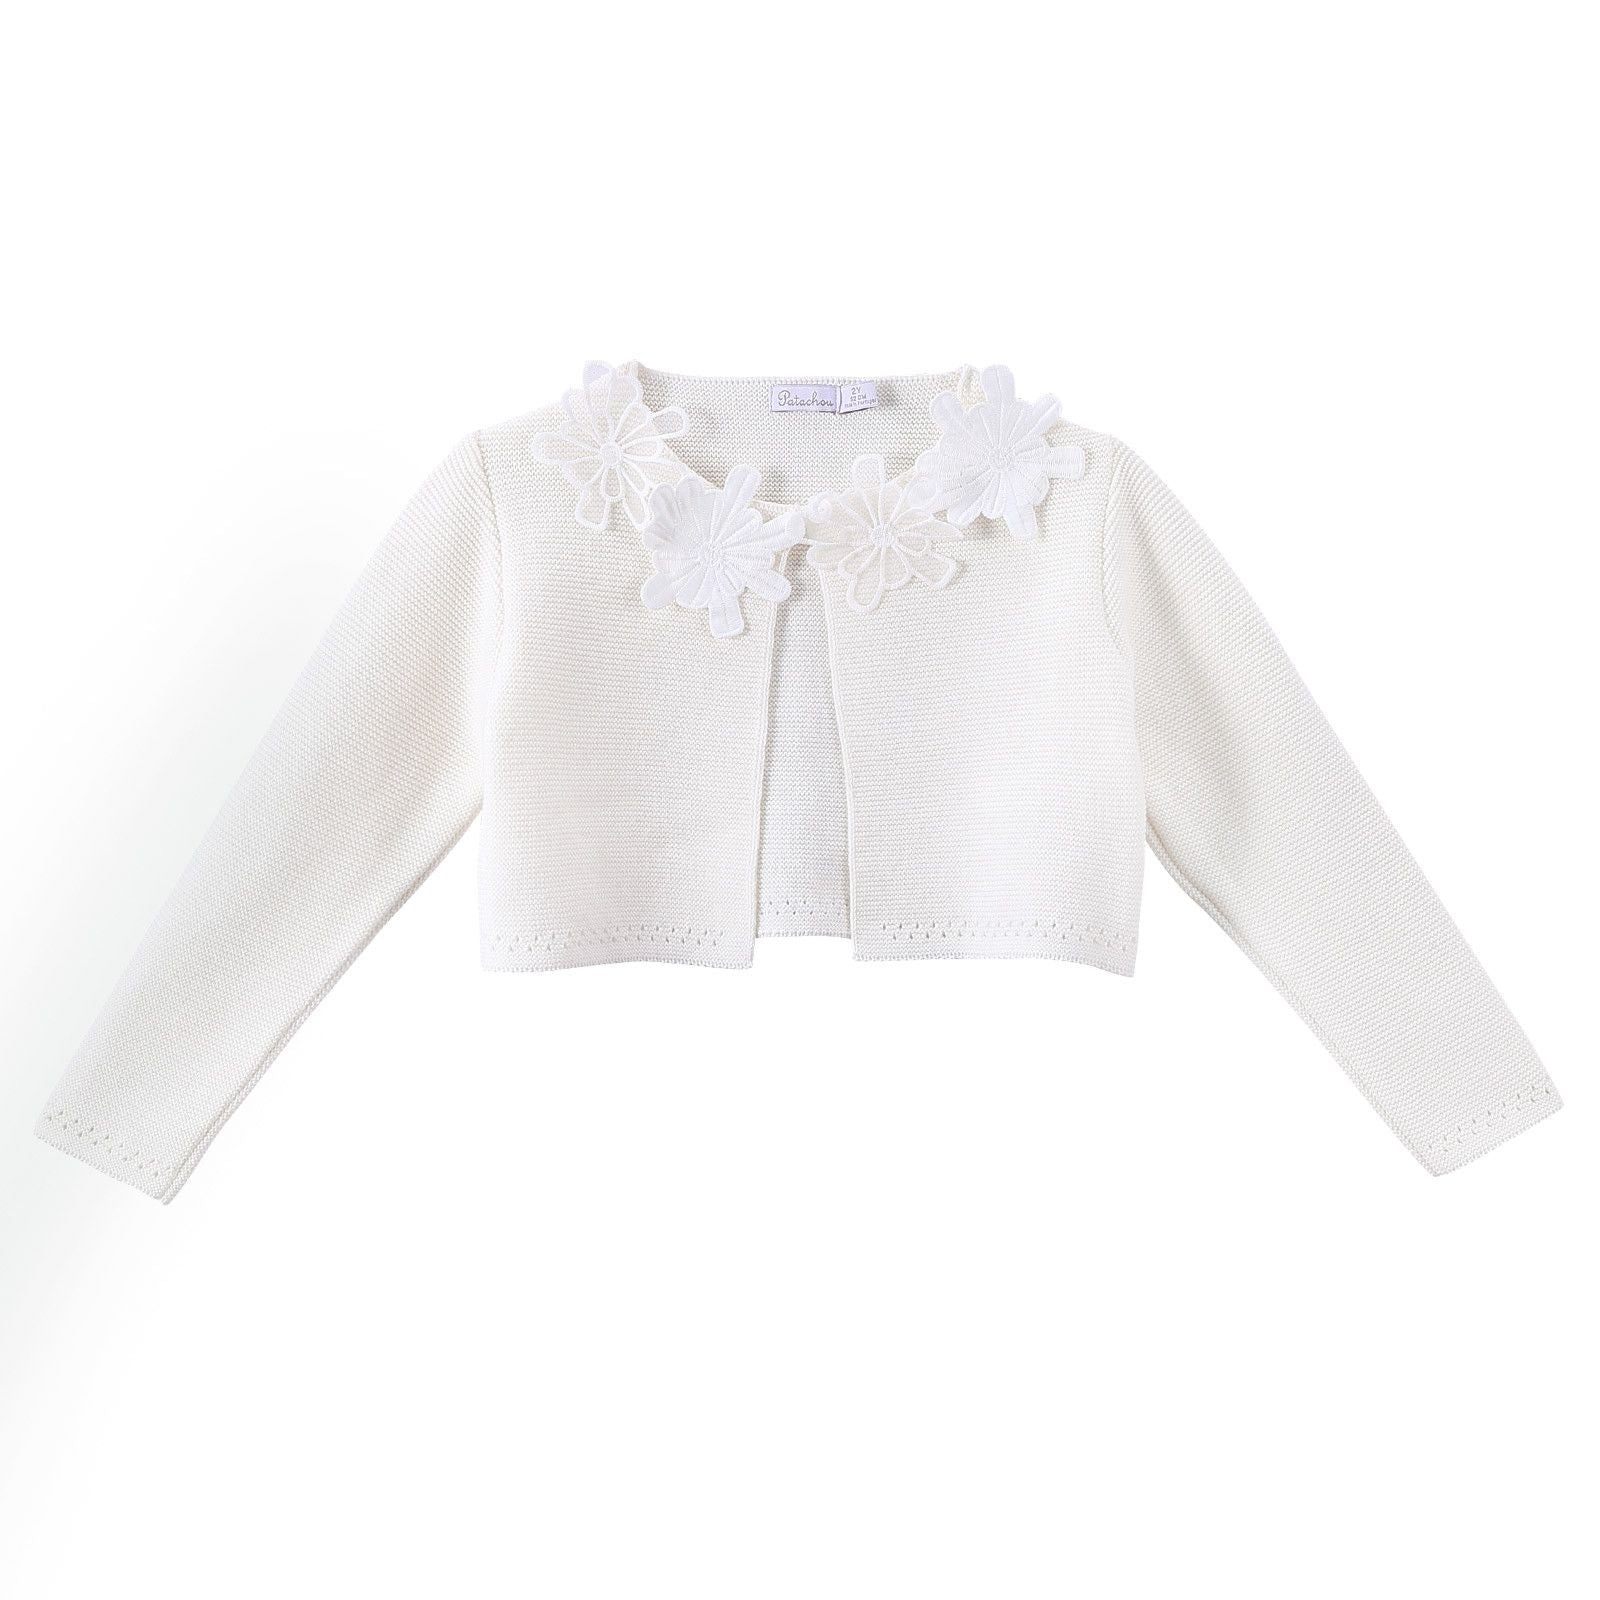 Girls White Knitted Cotton Cardigan With Patch Flower Trims - CÉMAROSE | Children's Fashion Store - 1